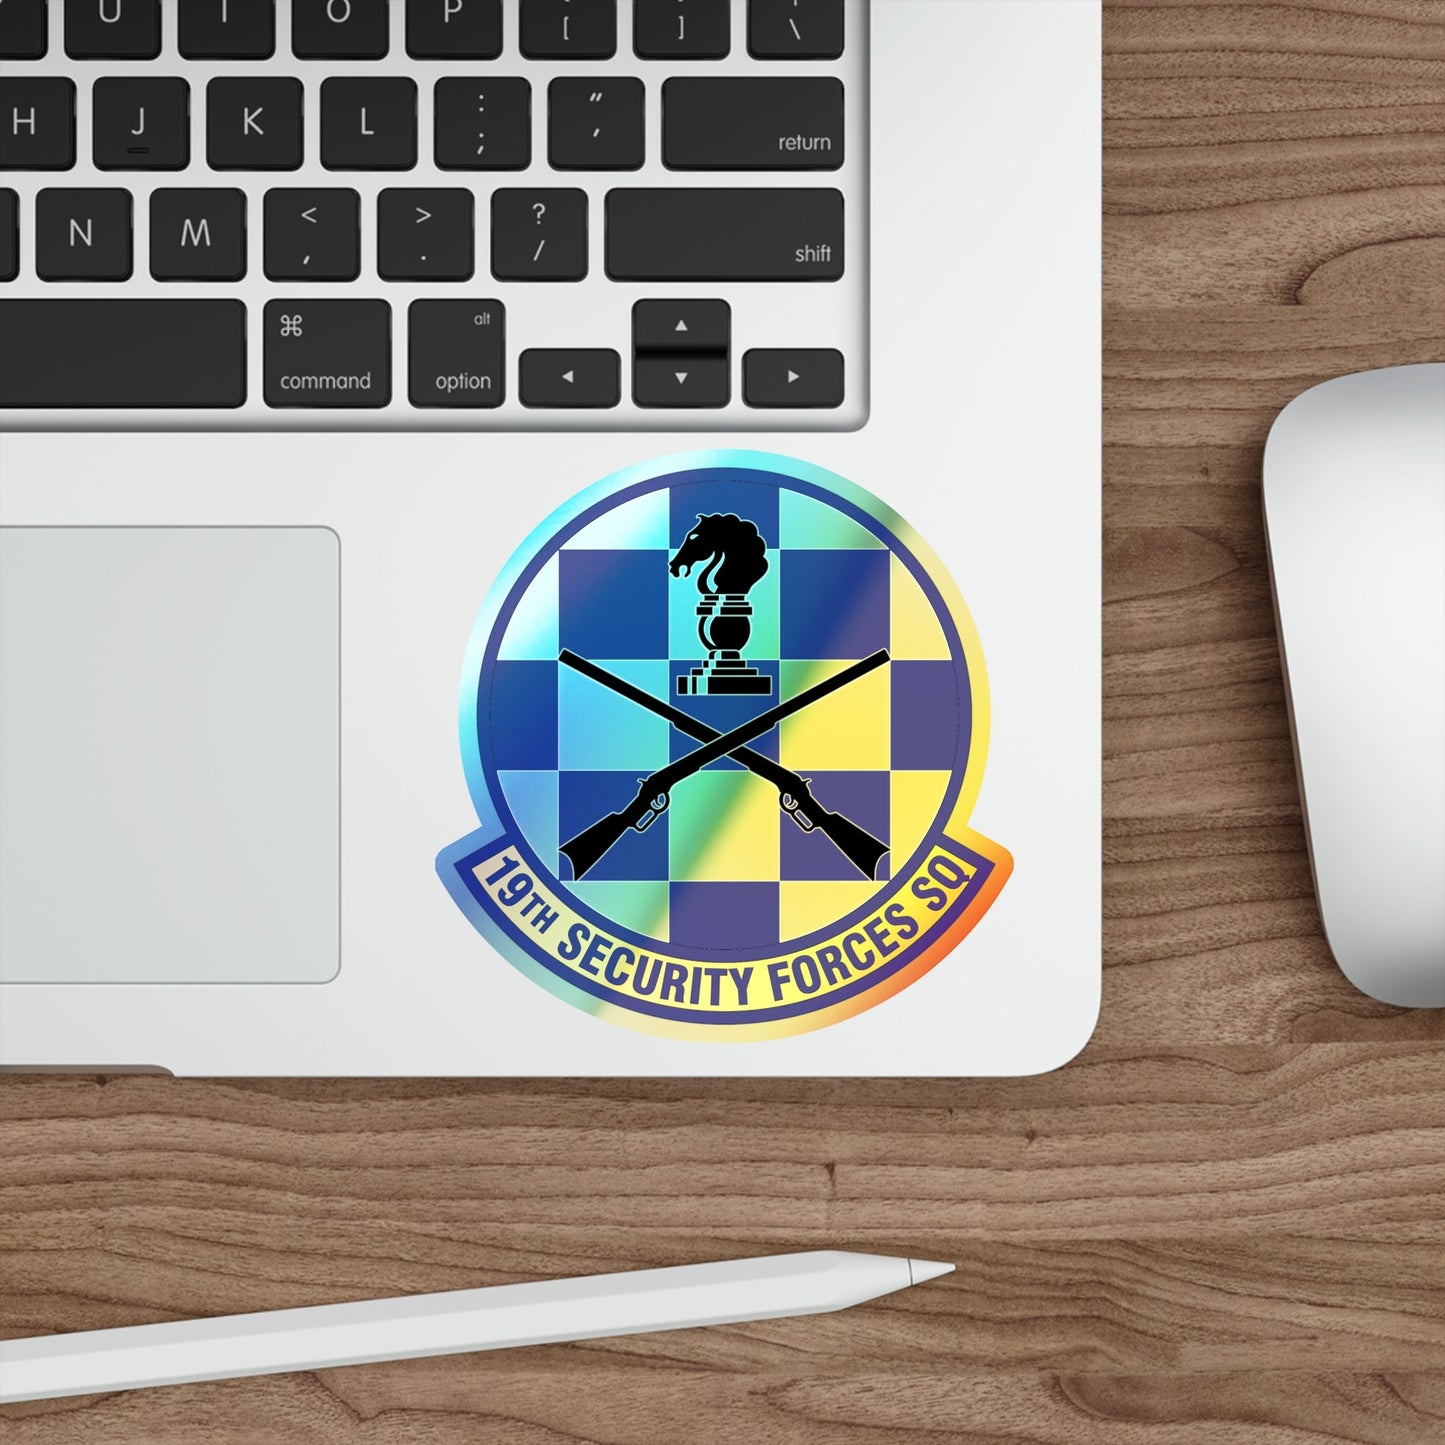 19 Security Forces Squadron AMC (U.S. Air Force) Holographic STICKER Die-Cut Vinyl Decal-The Sticker Space